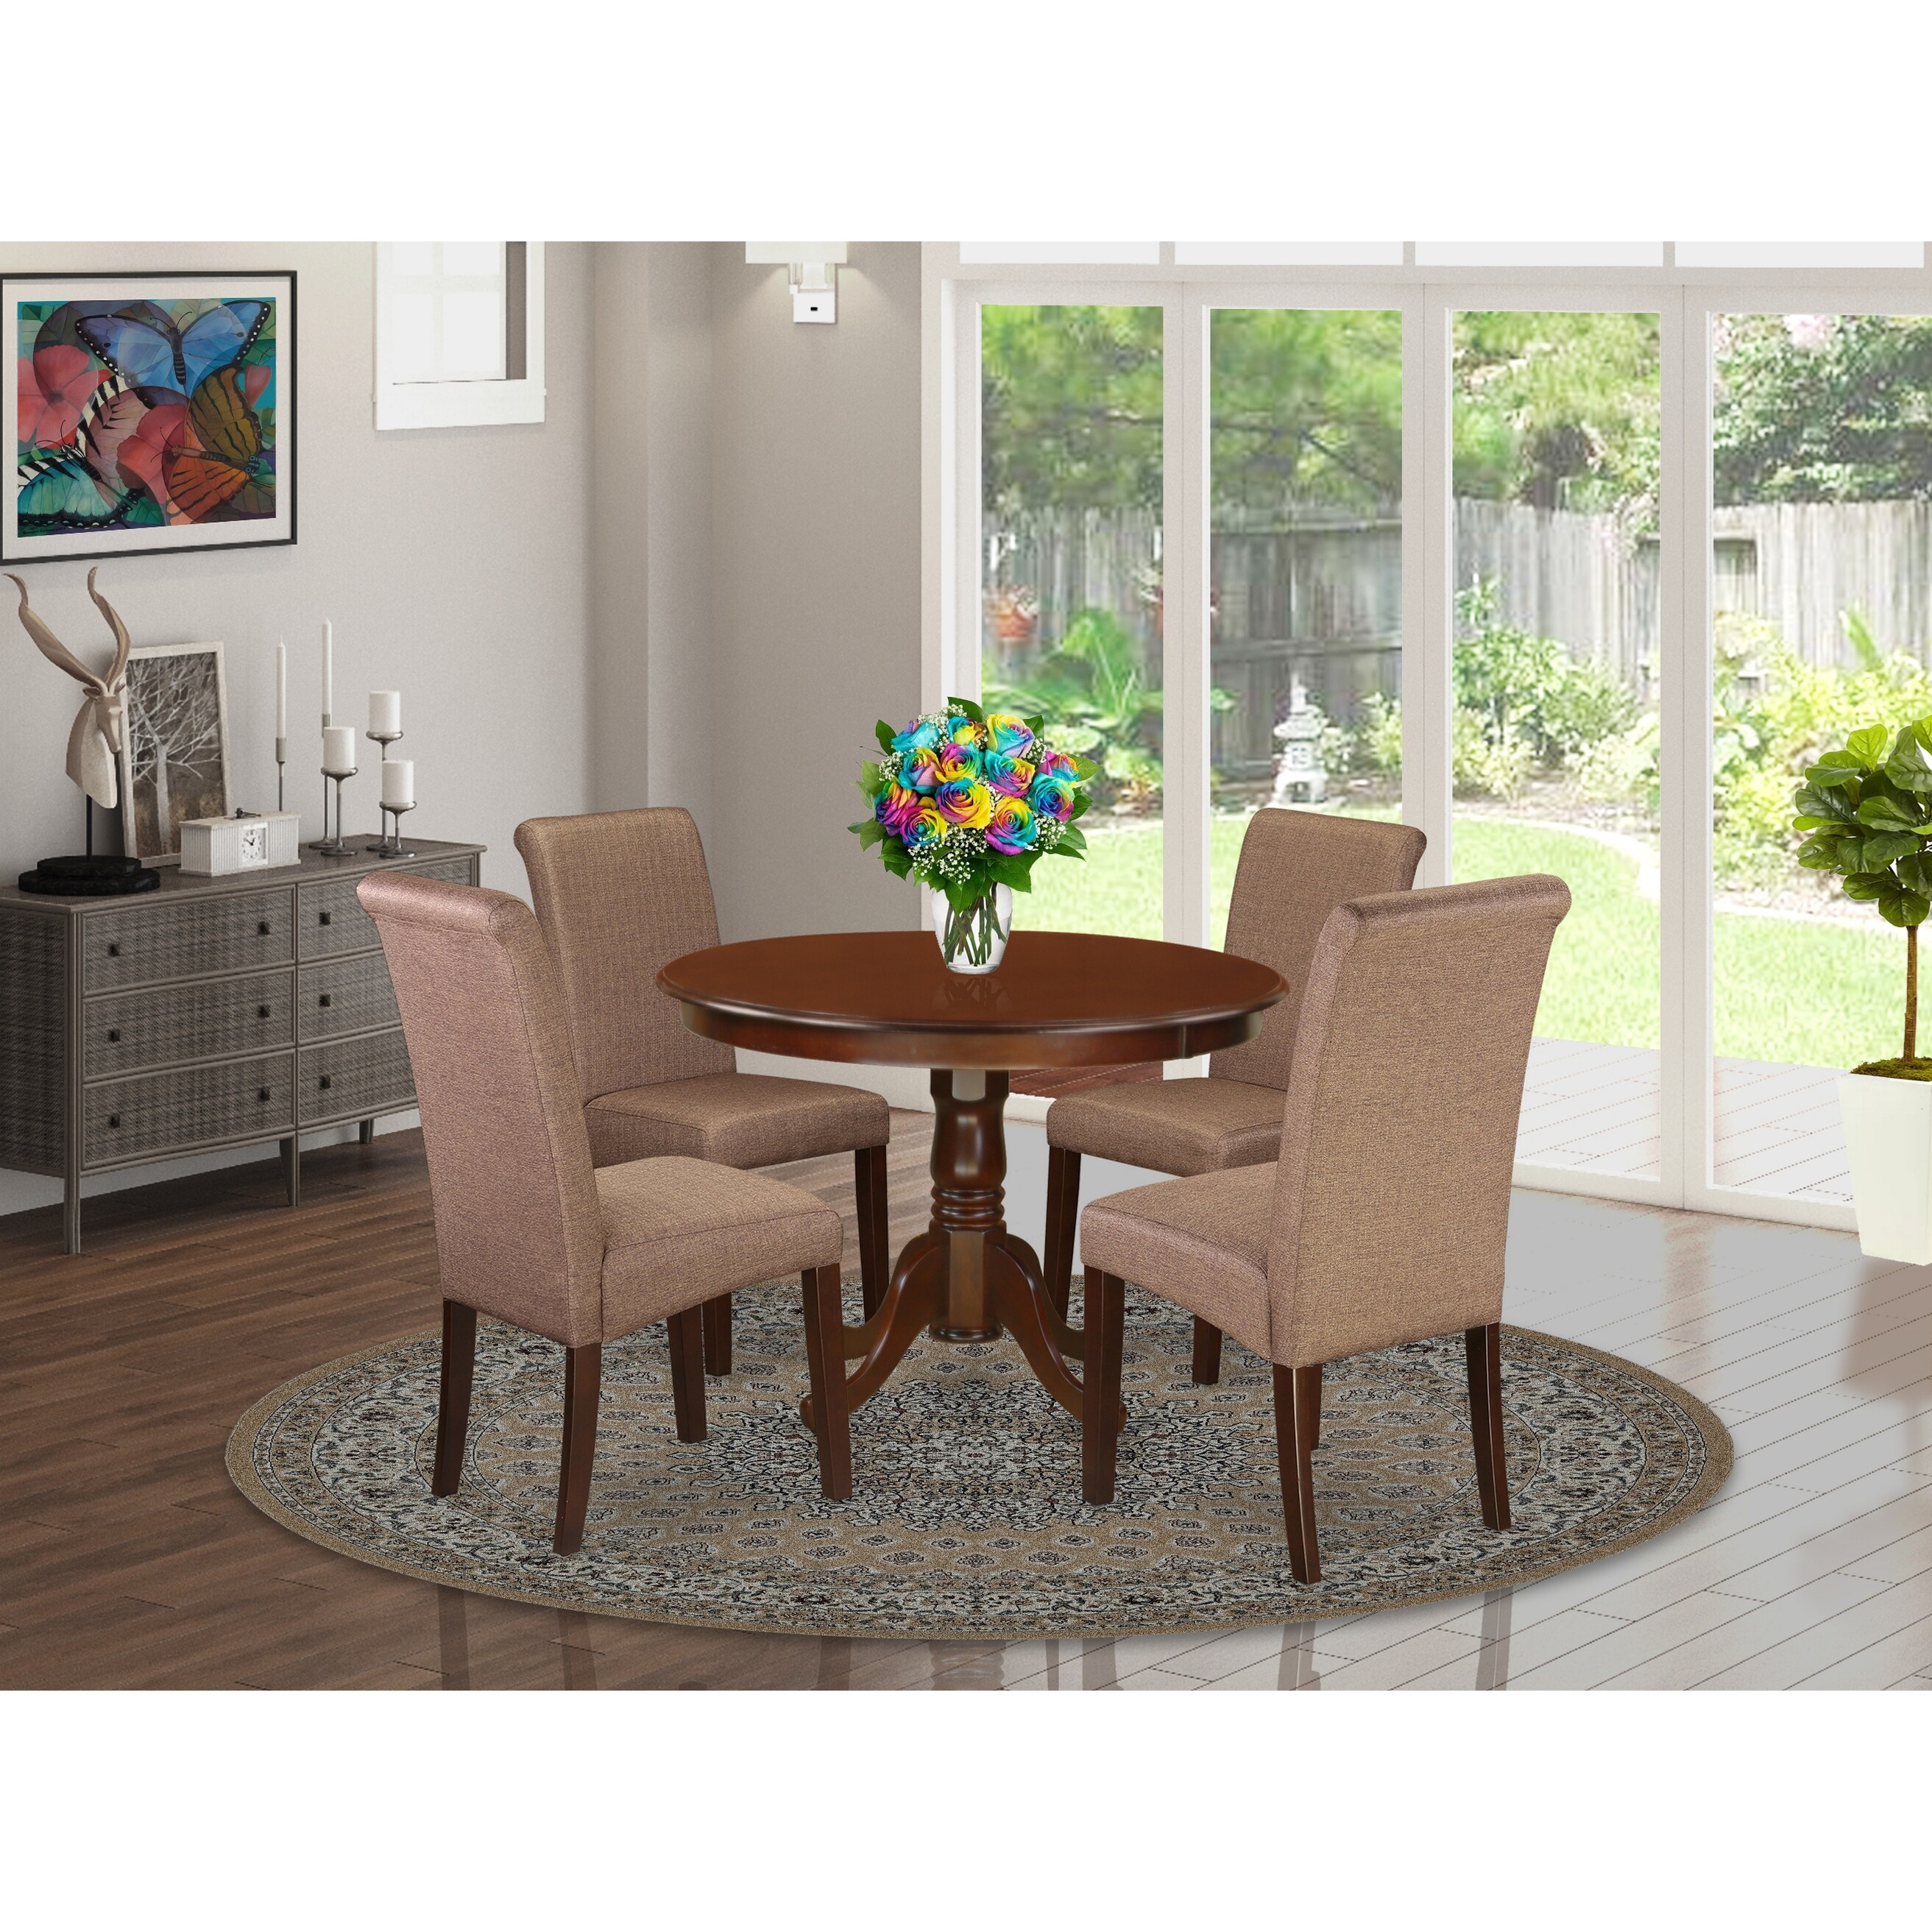 3pc Small Round Kitchen Table With Elegant Parson Chairs Number Of Chair Option Overstock 27864830